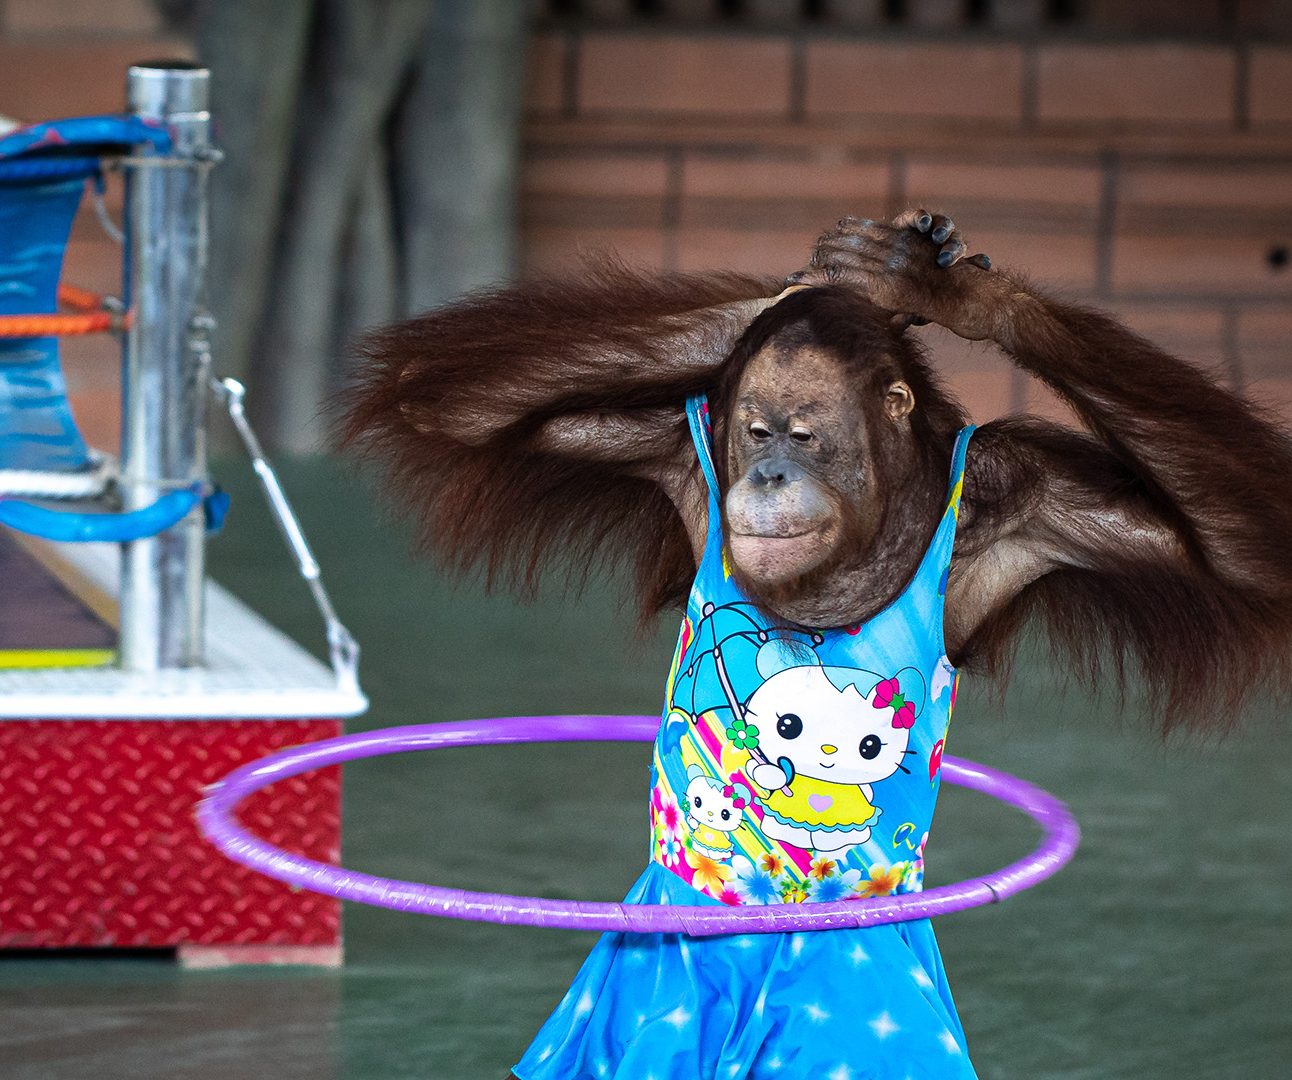 An orangutan in a dress is hulahooping with arms raised